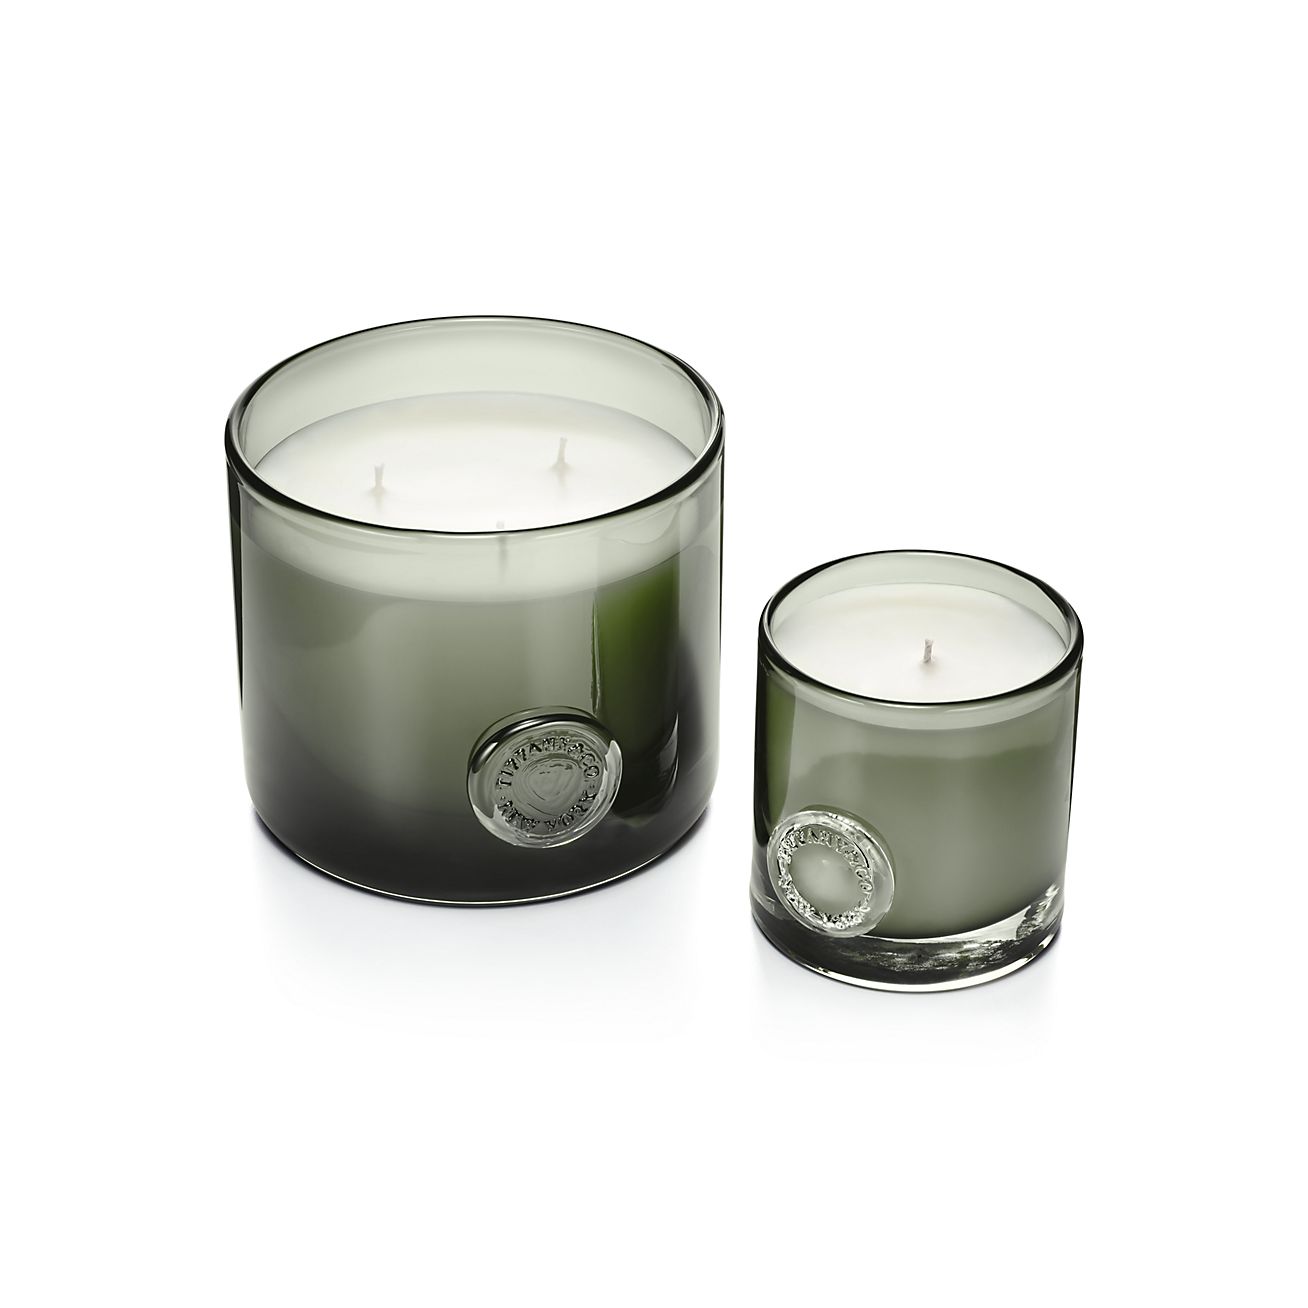 Tiffany Seal candle in a gray mouth 